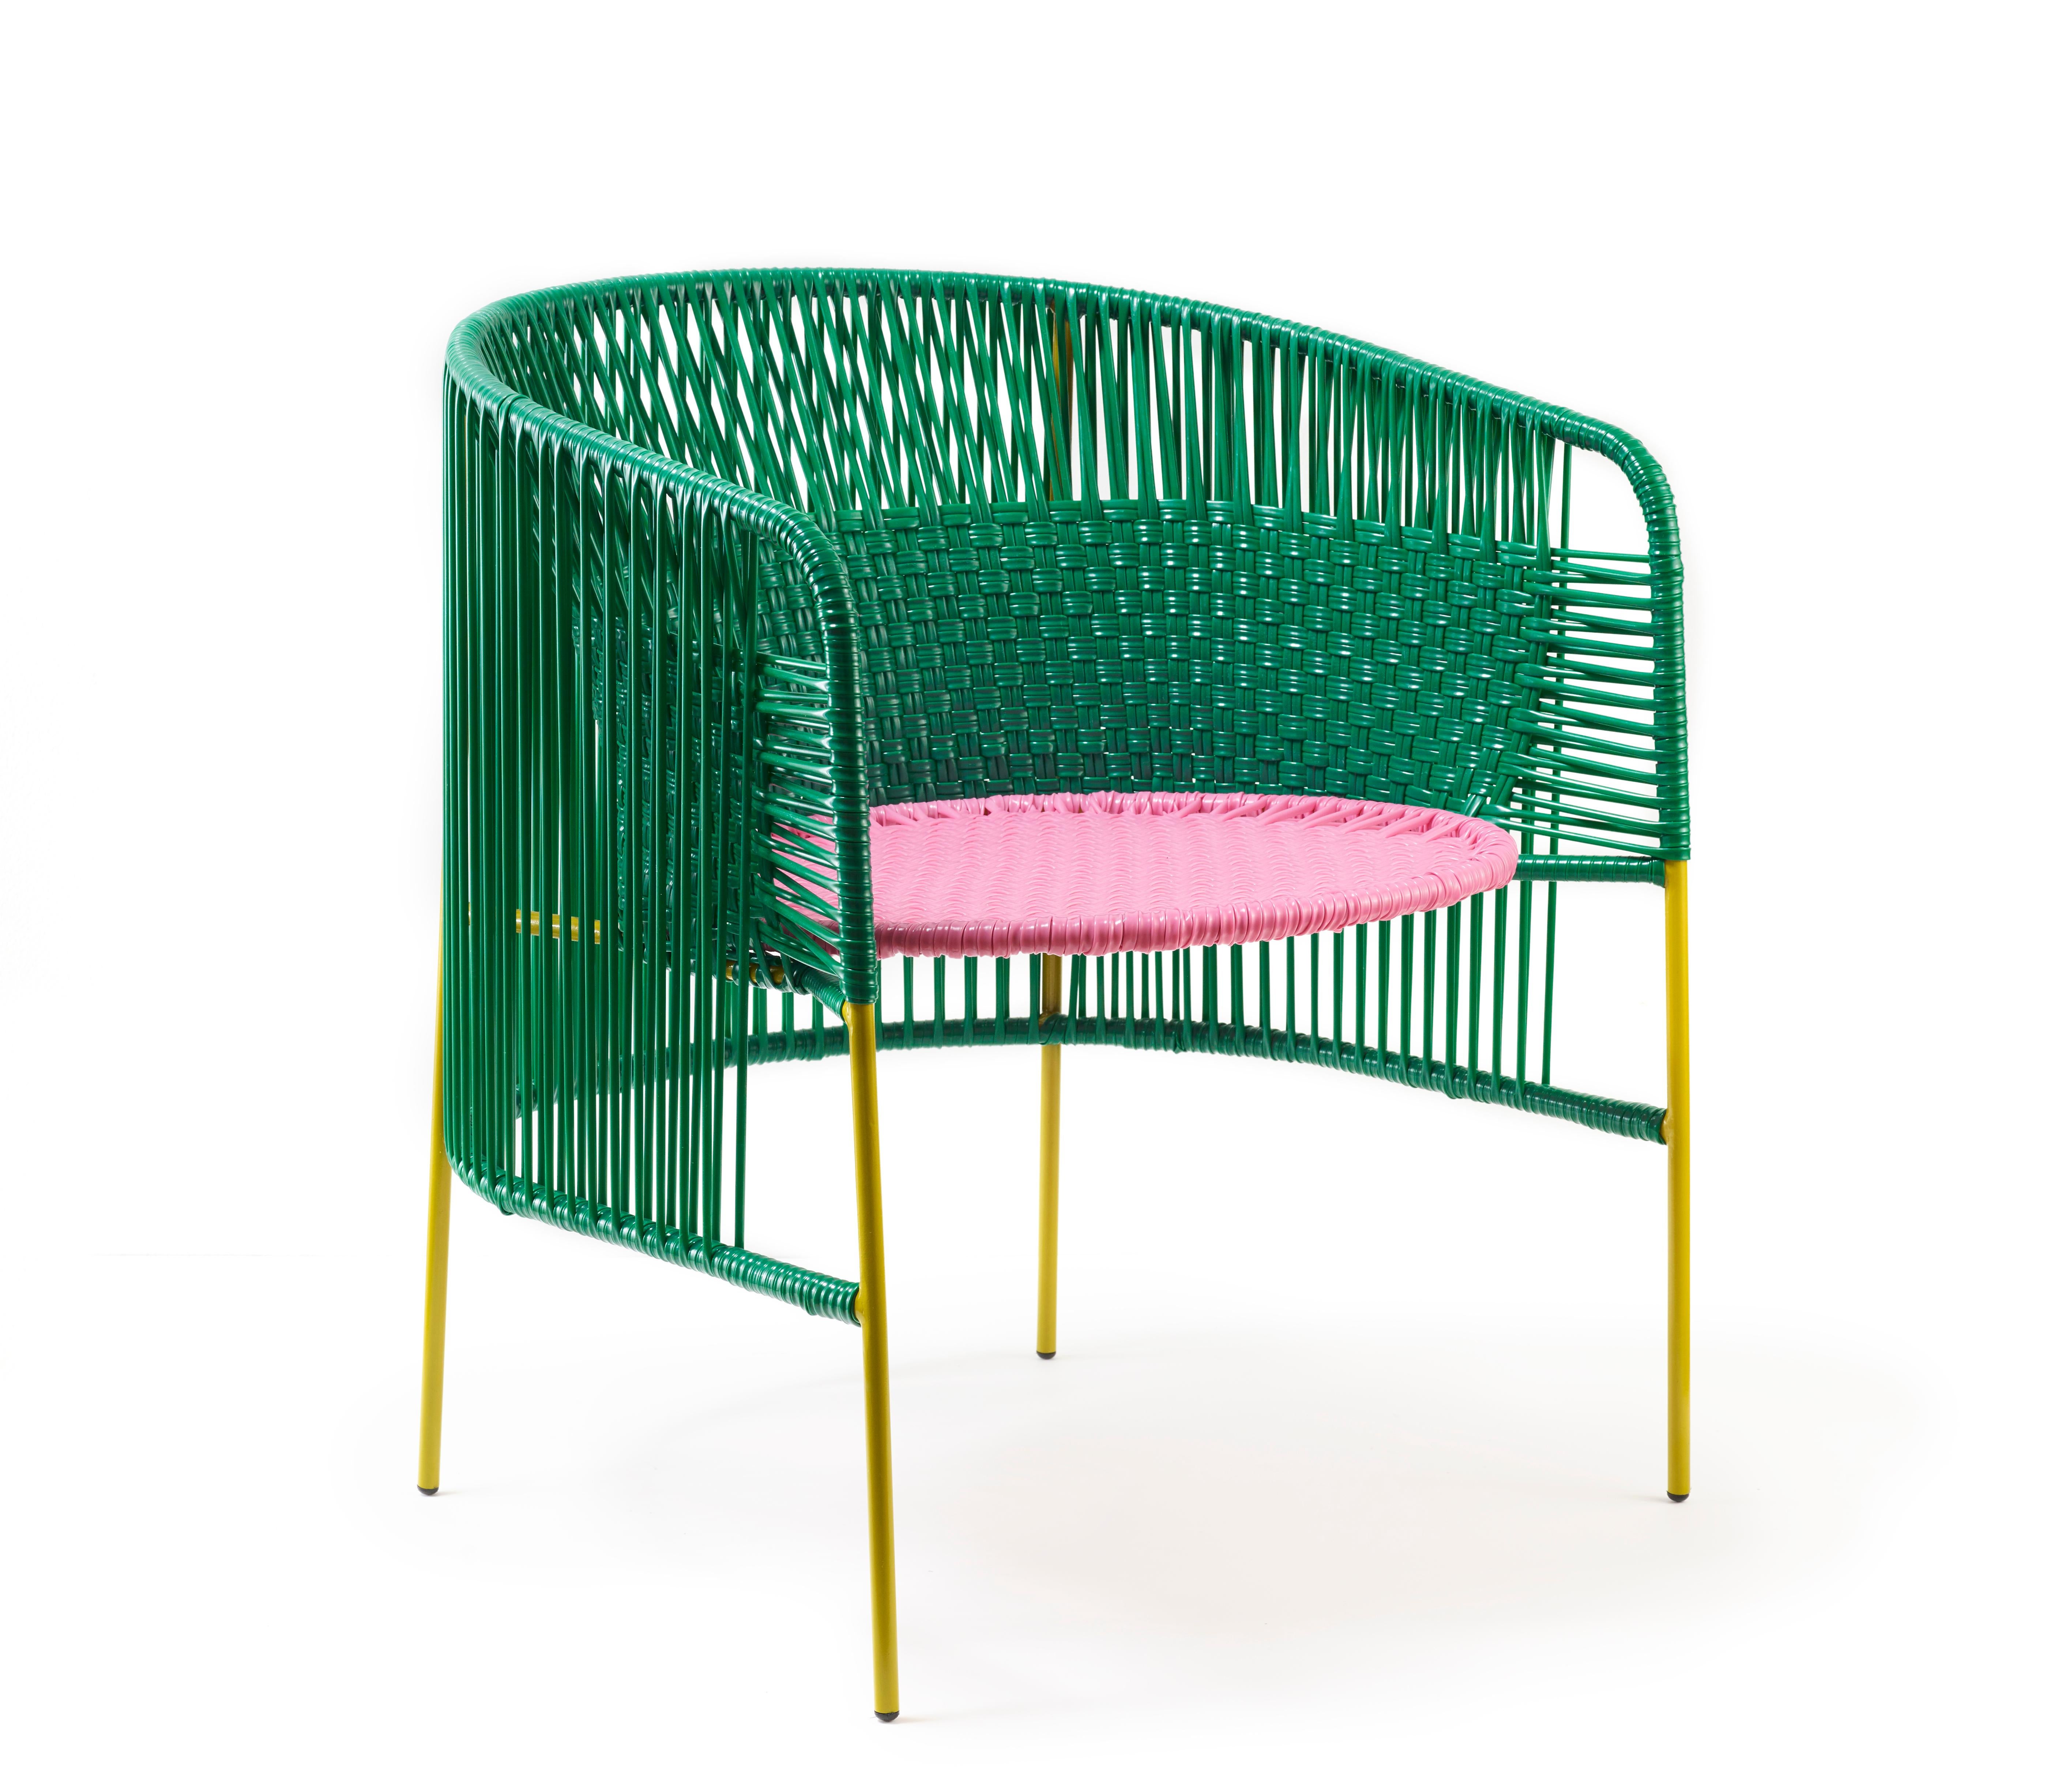 Set of 2 green Caribe lounge chair by Sebastian Herkner.
Materials: galvanized and powder-coated tubular steel. PVC strings are made from recycled plastic.
Technique: made from recycled plastic and weaved by local craftspeople in Colombia.